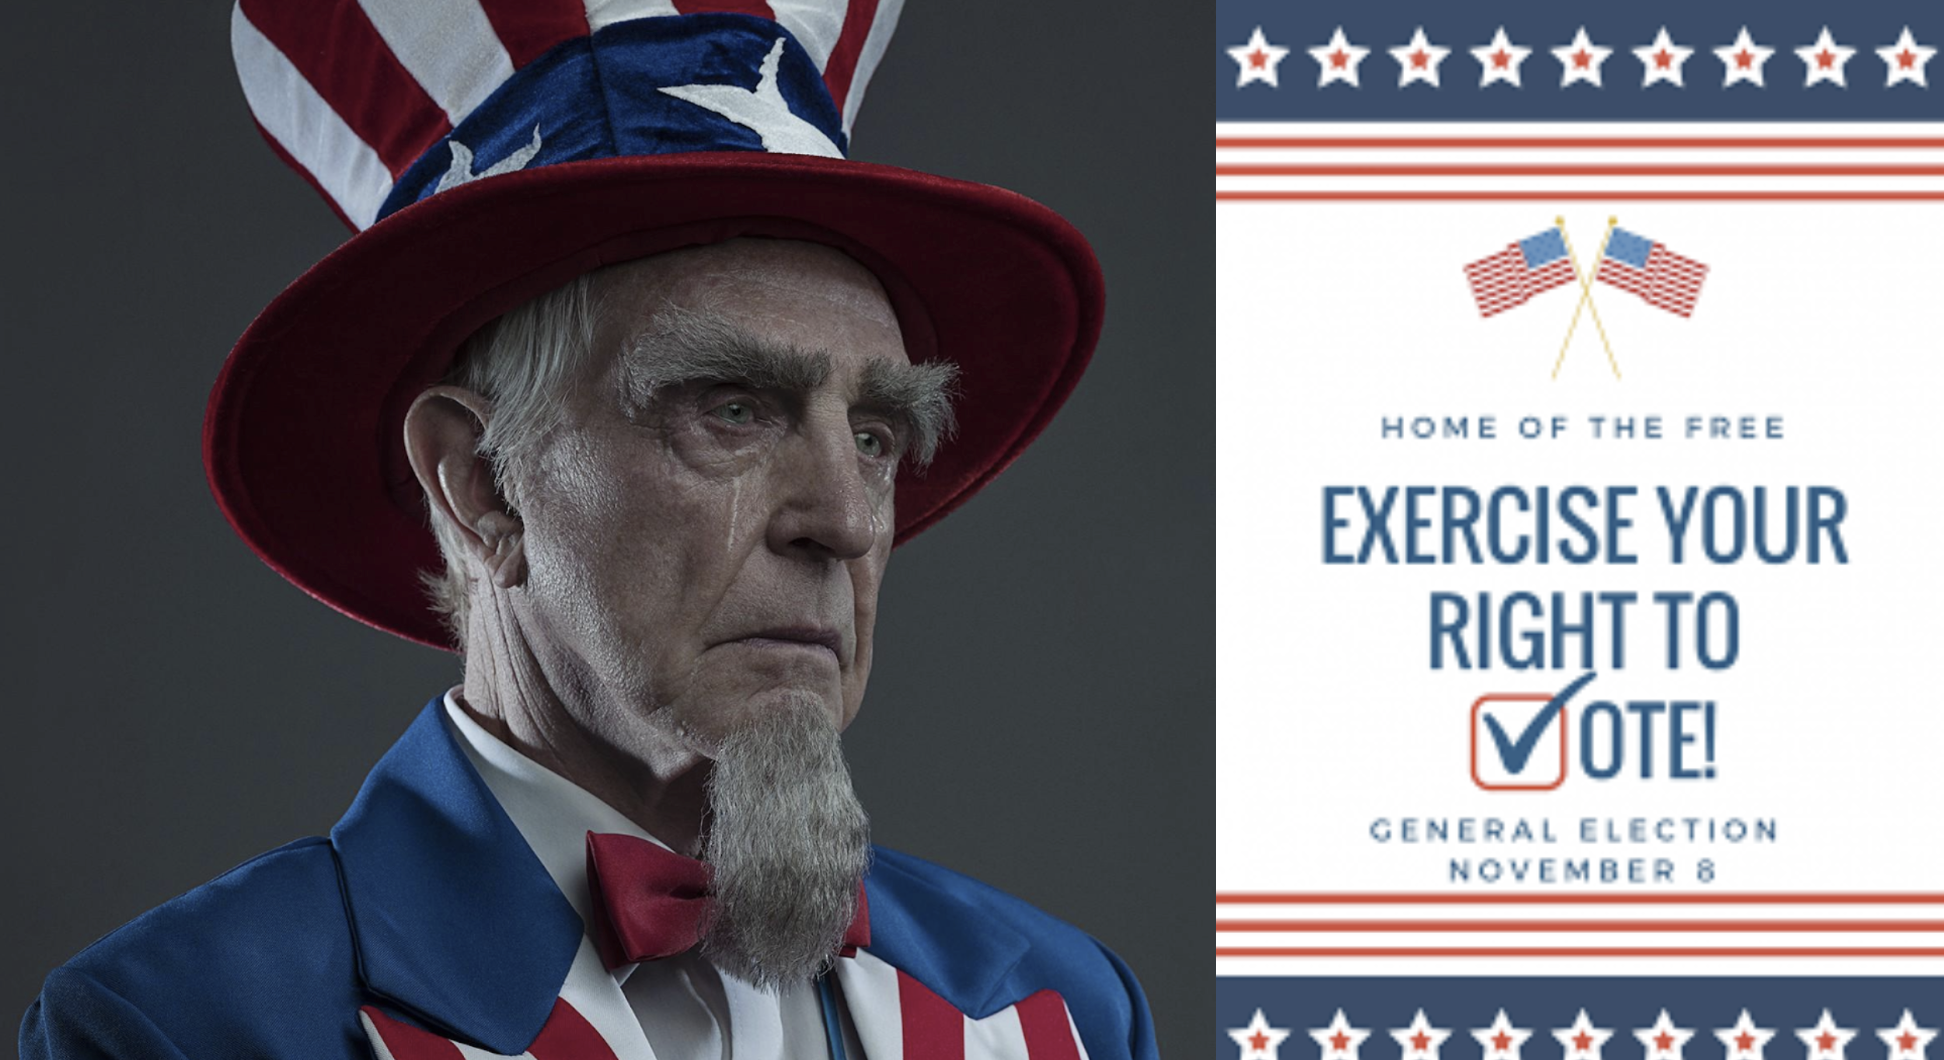 uncle sam crying, exercise your right to vote